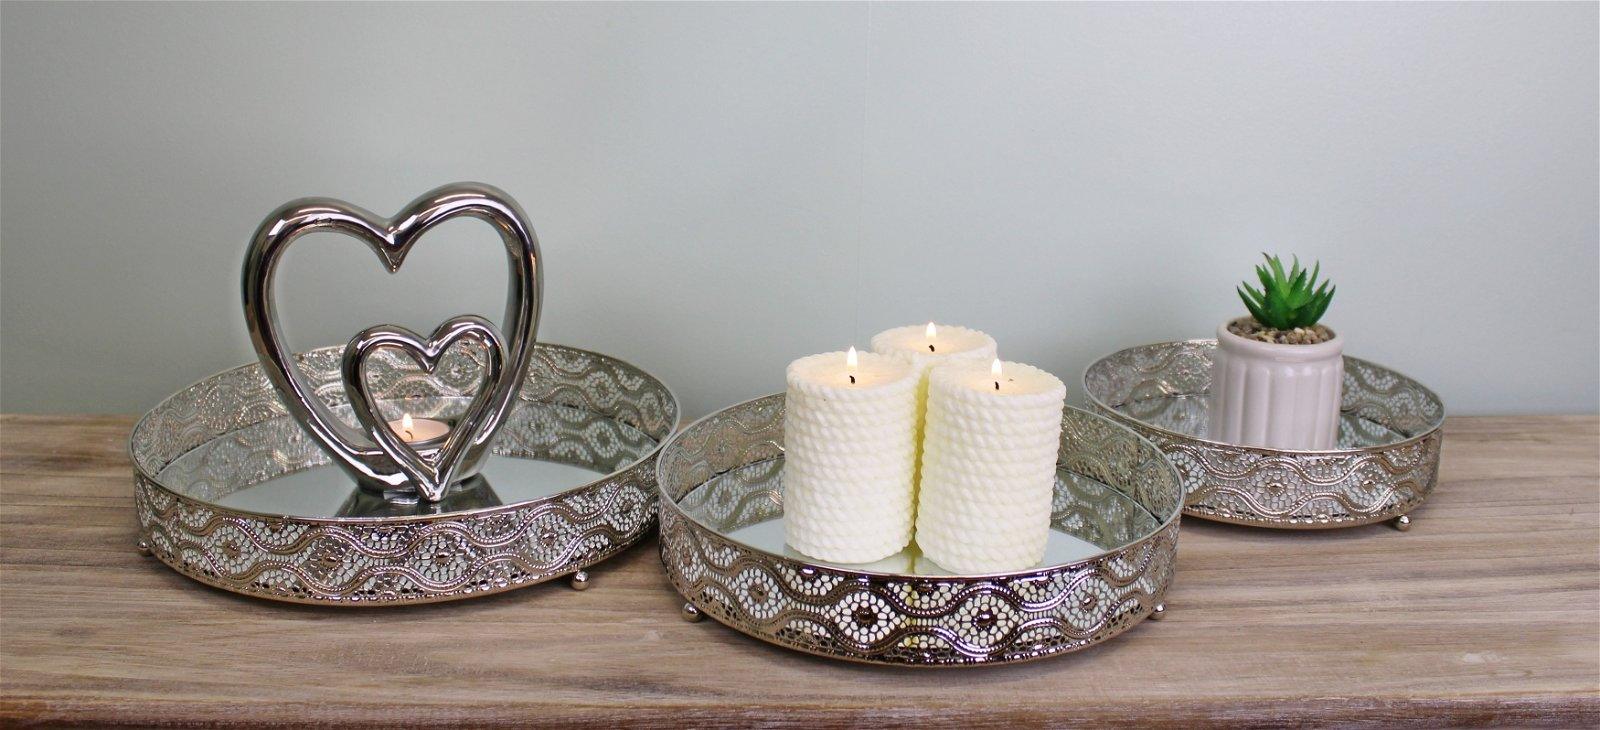 View Set Of 3 Silver Metal and Mirrored Candle Plates information